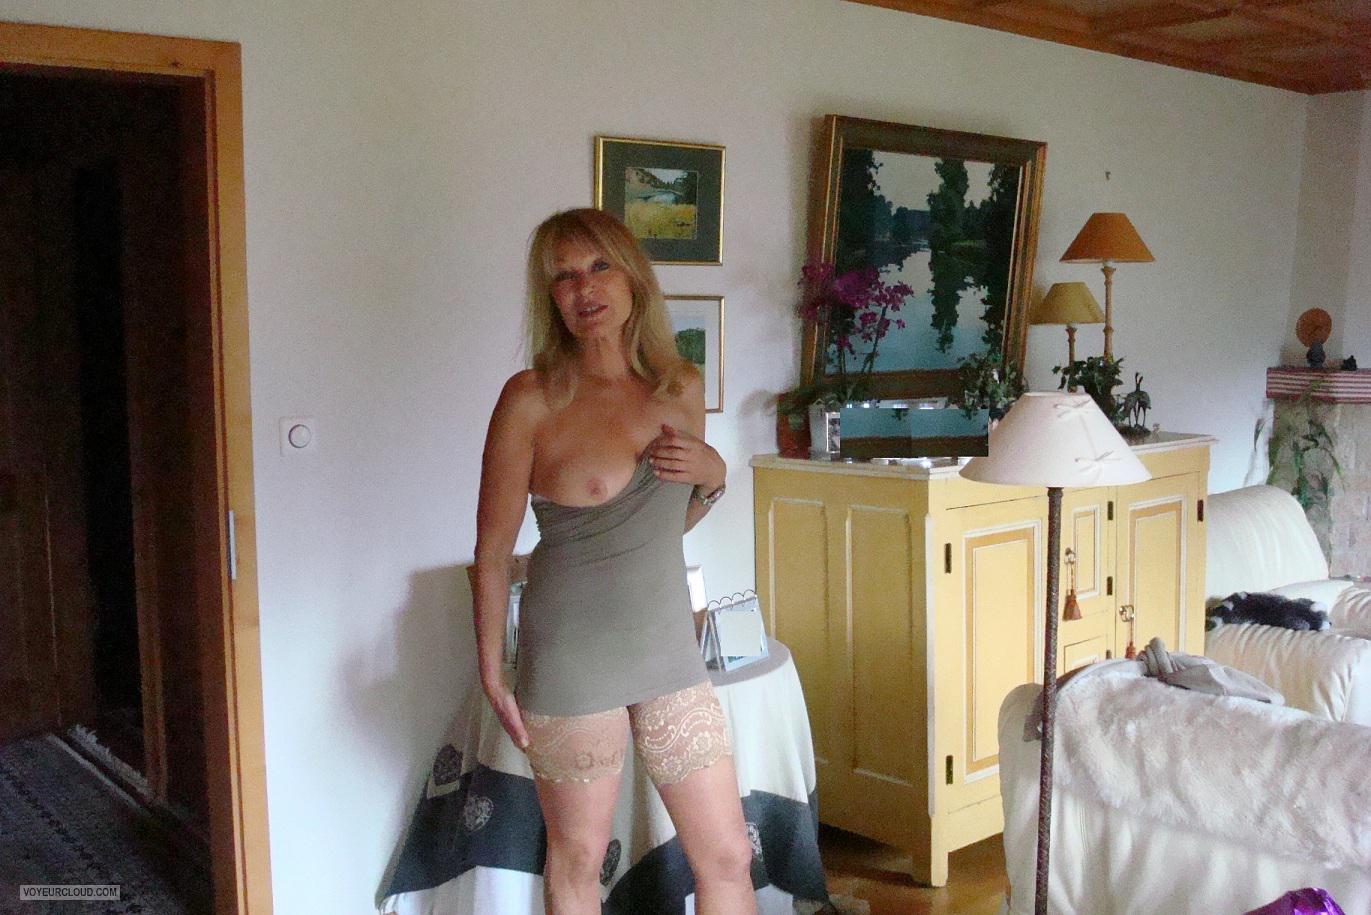 Tit Flash: My Big Tits - Topless Sandy from Italy